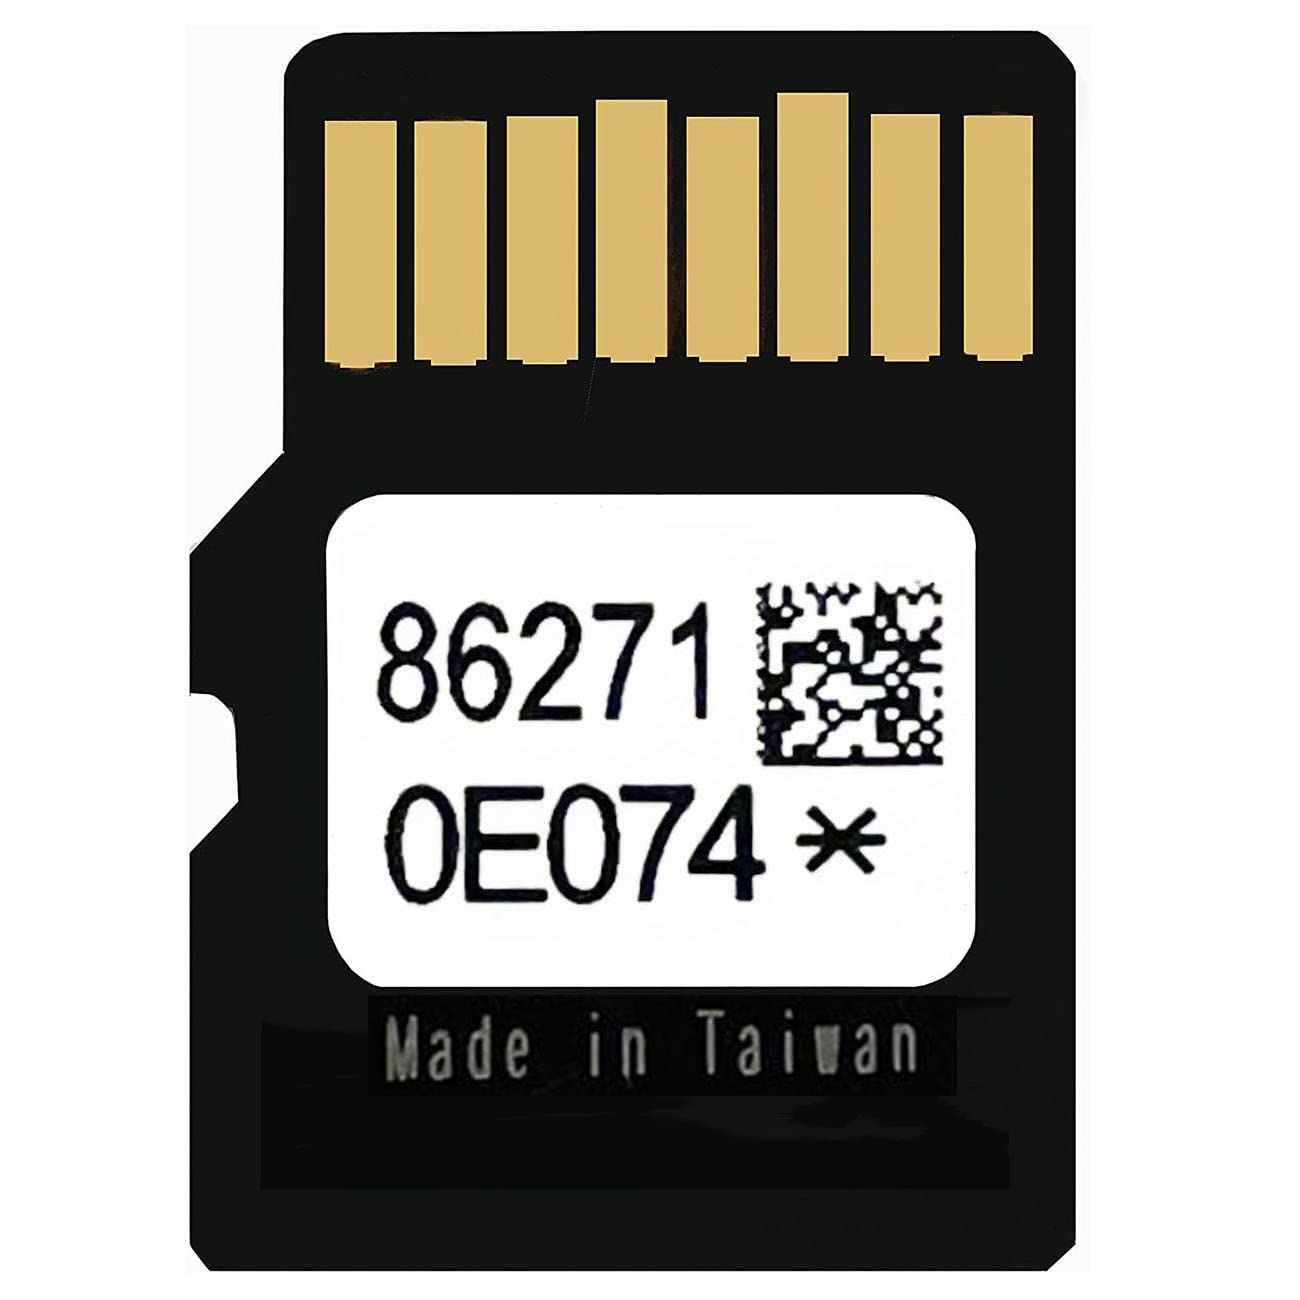 86271 0E074 Latest Maps Update Version 2022 Navigation sd Card Micro Fits Toyota Prius 4 Runner Avalon Camry